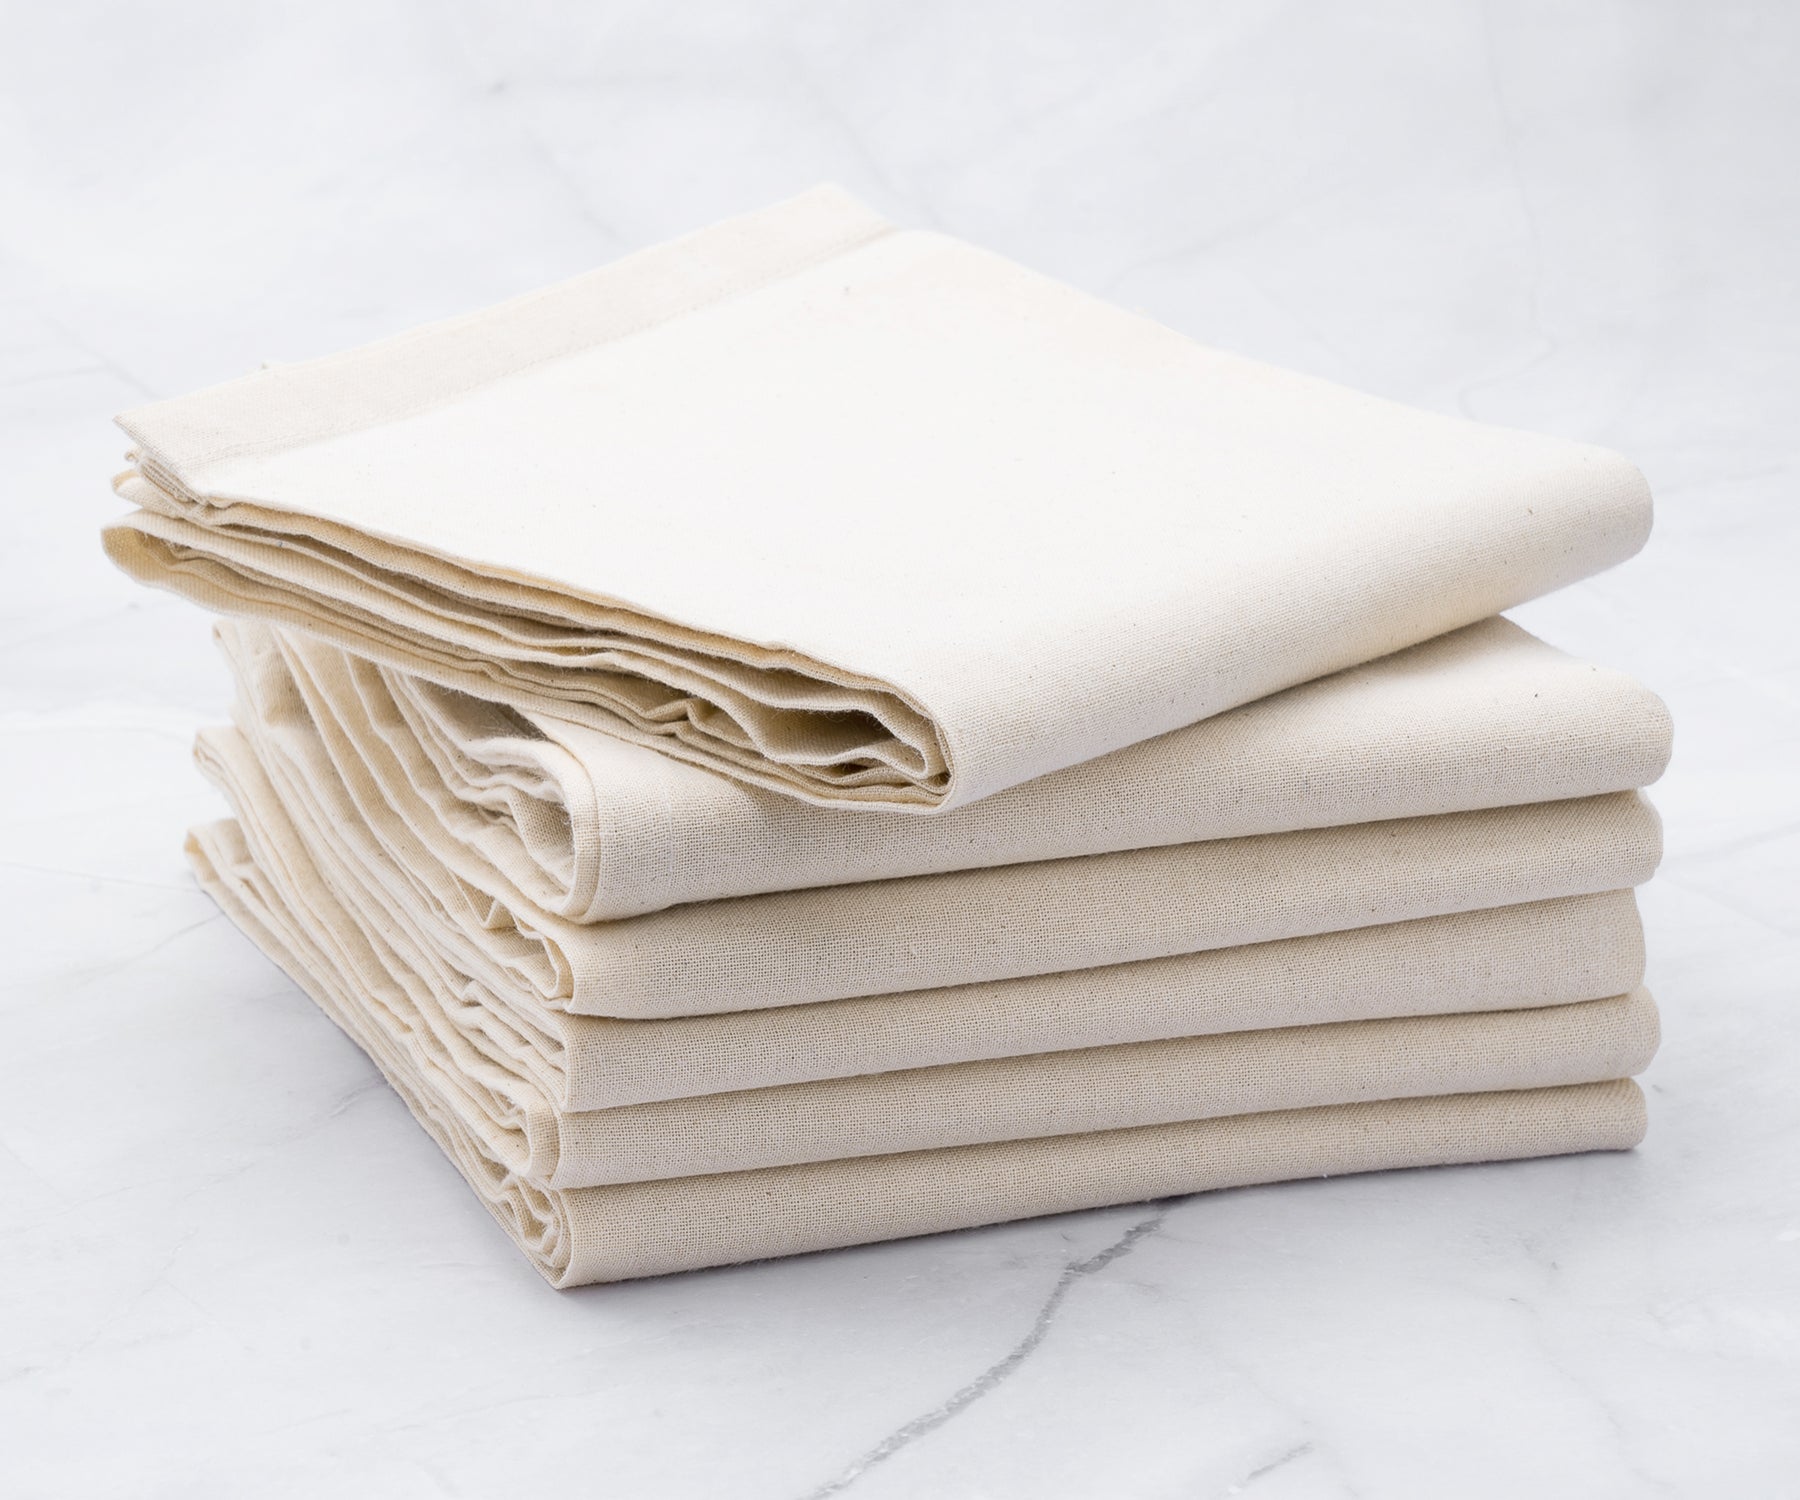 All Cotton and Linen Flour Sack Towels, Kitchen Towels, Dish Towels for Kitchen Set of 6, Natural, 28 x 28, Beige